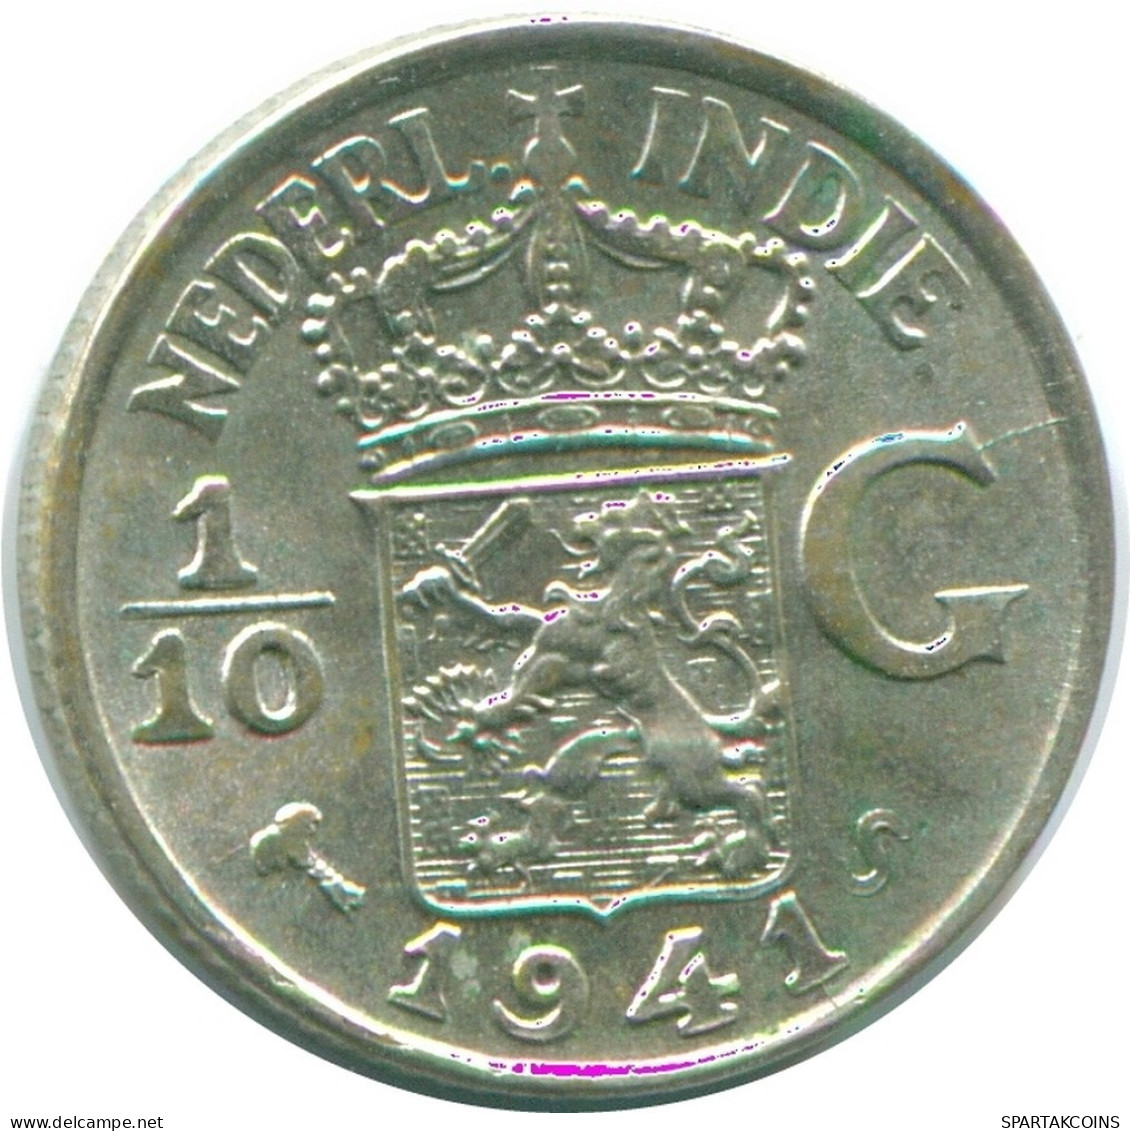 1/10 GULDEN 1941 S NETHERLANDS EAST INDIES SILVER Colonial Coin #NL13556.3.U.A - Dutch East Indies